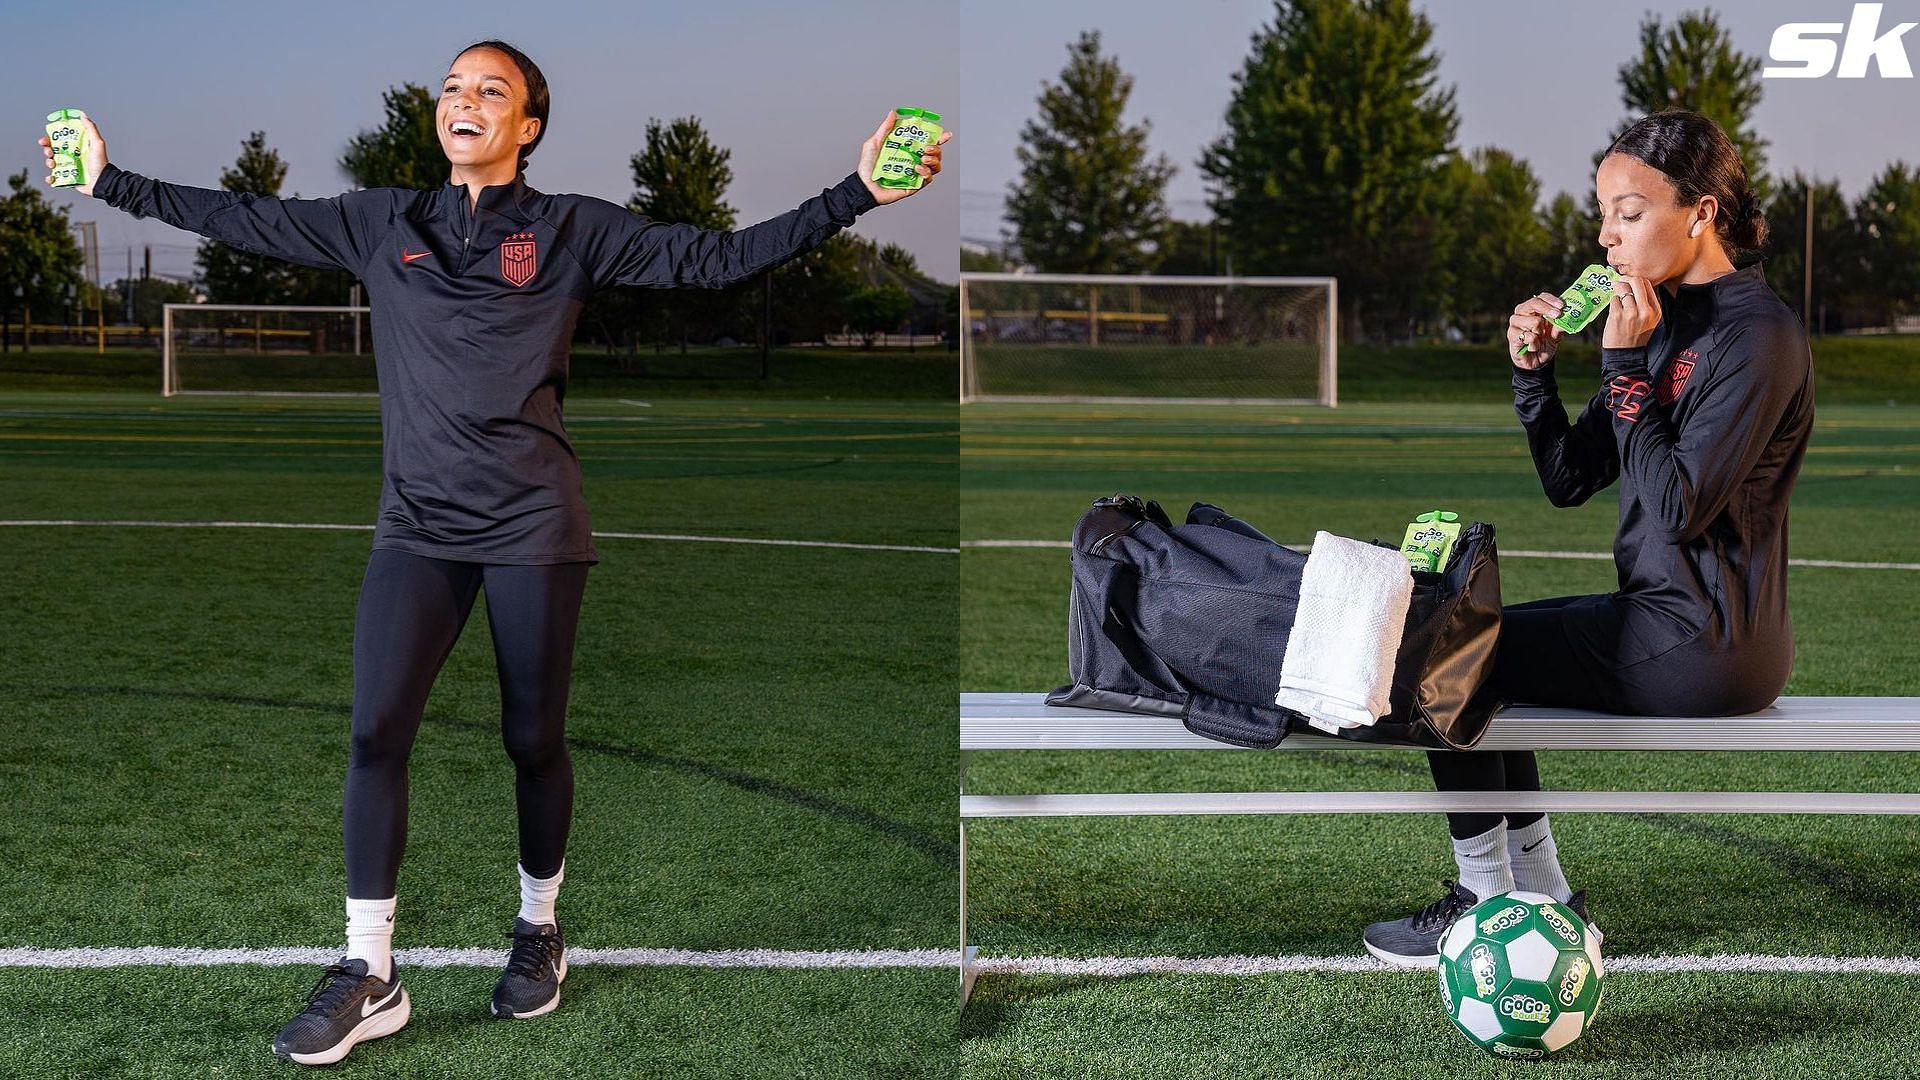 American soccer player Mallory Pugh posing for GoGo squeeZ ad